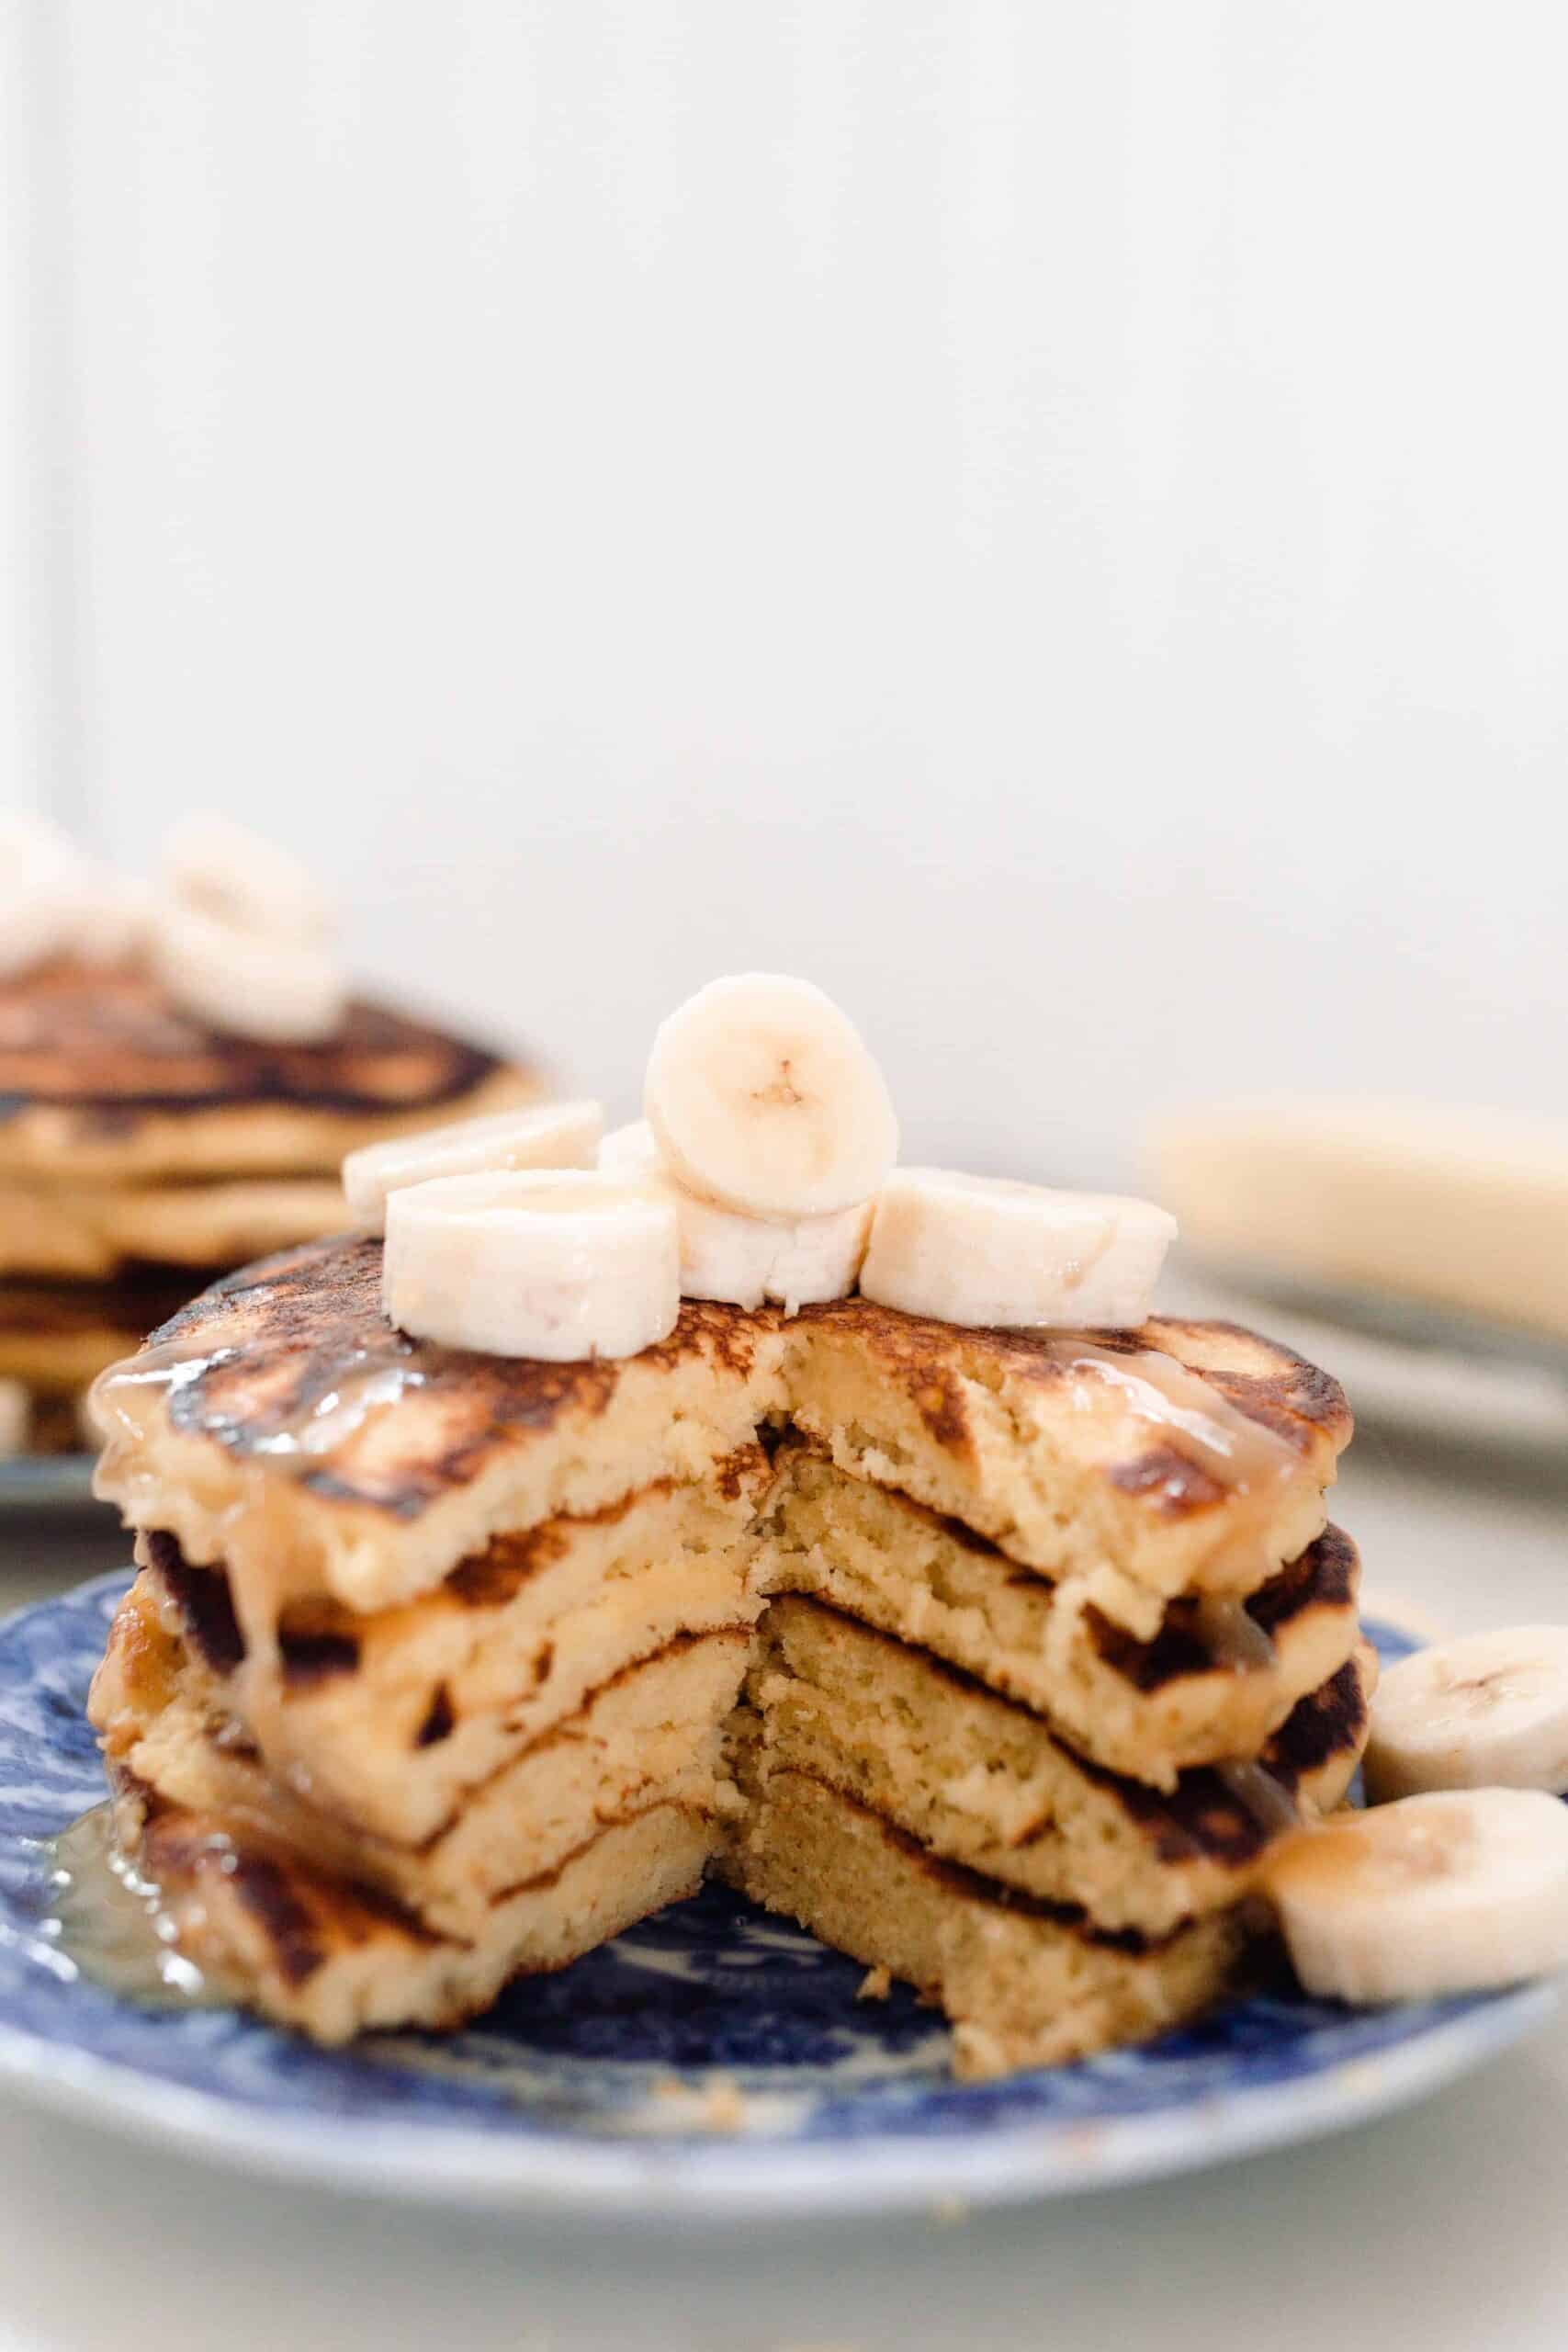 stack of einkorn pancakes topped with bananas on a blue and white antique plate. Butter on a dish is in the background